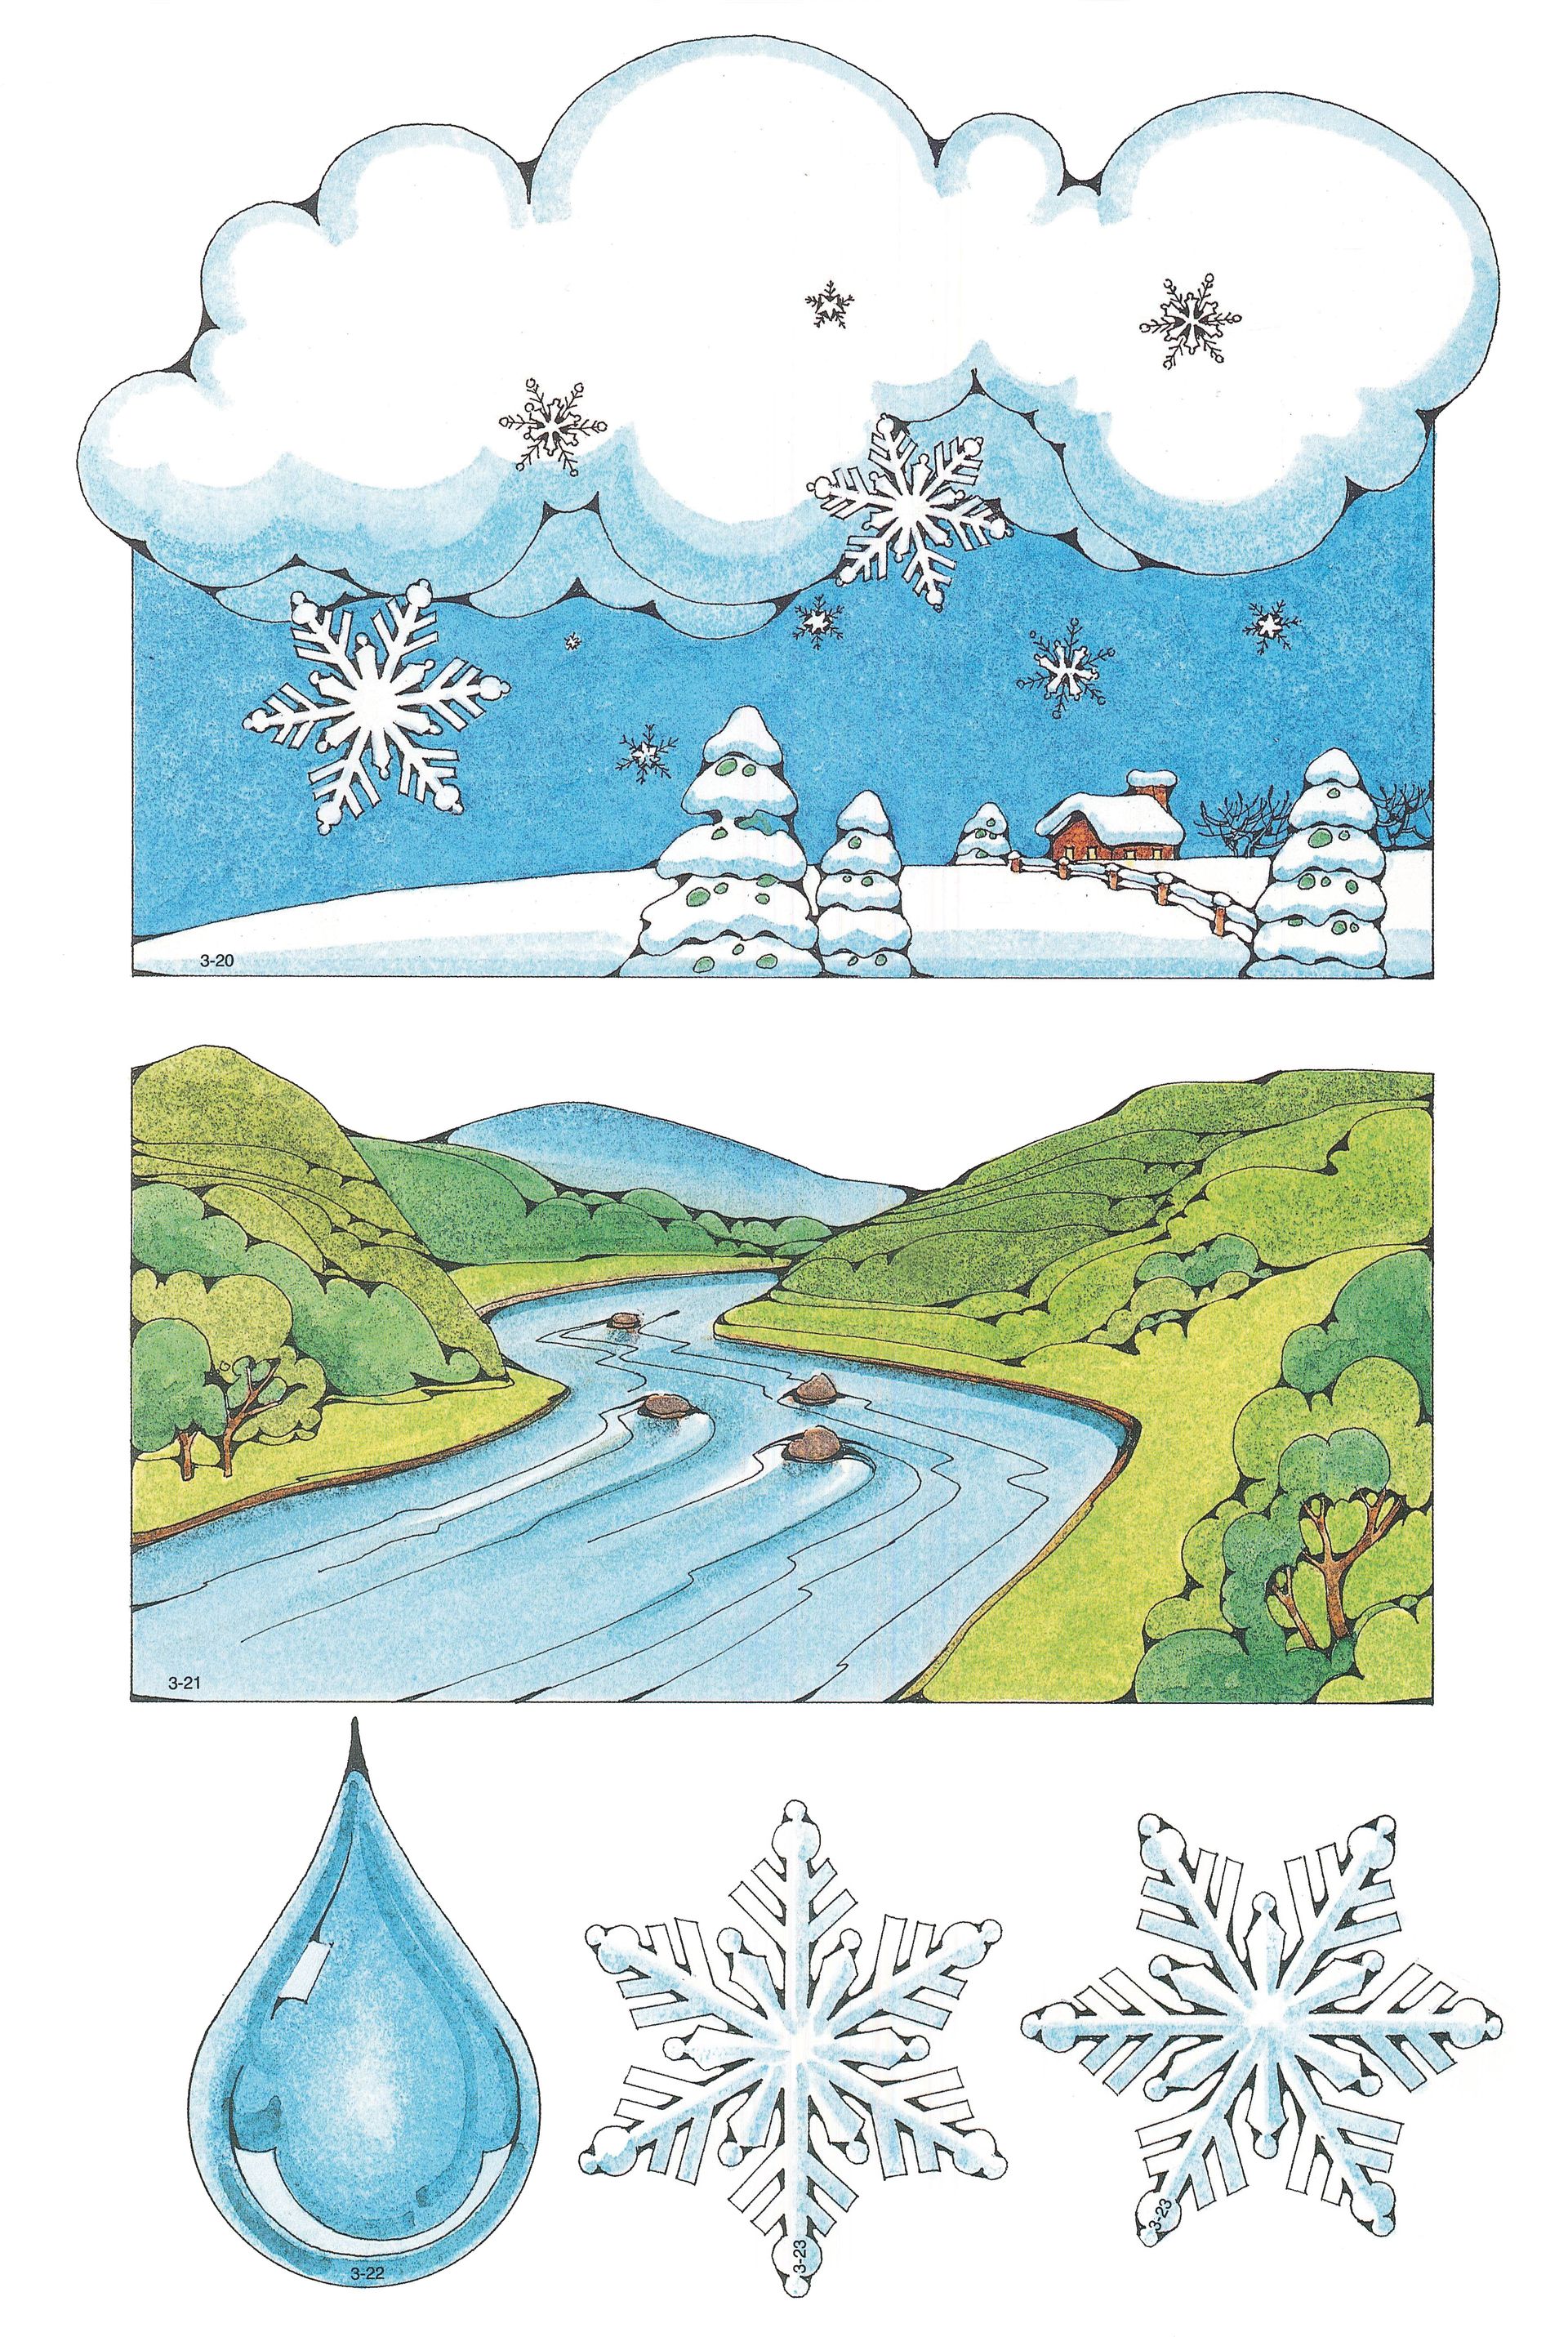 Primary Visual Aids: Cutouts 3-20, Snow Scene with Snowflakes and Clouds; 3-21, Pastoral Scene with River, Hills, and Trees; 3-22, Large Drop of Water; 3-23, Two Large Snowflakes.